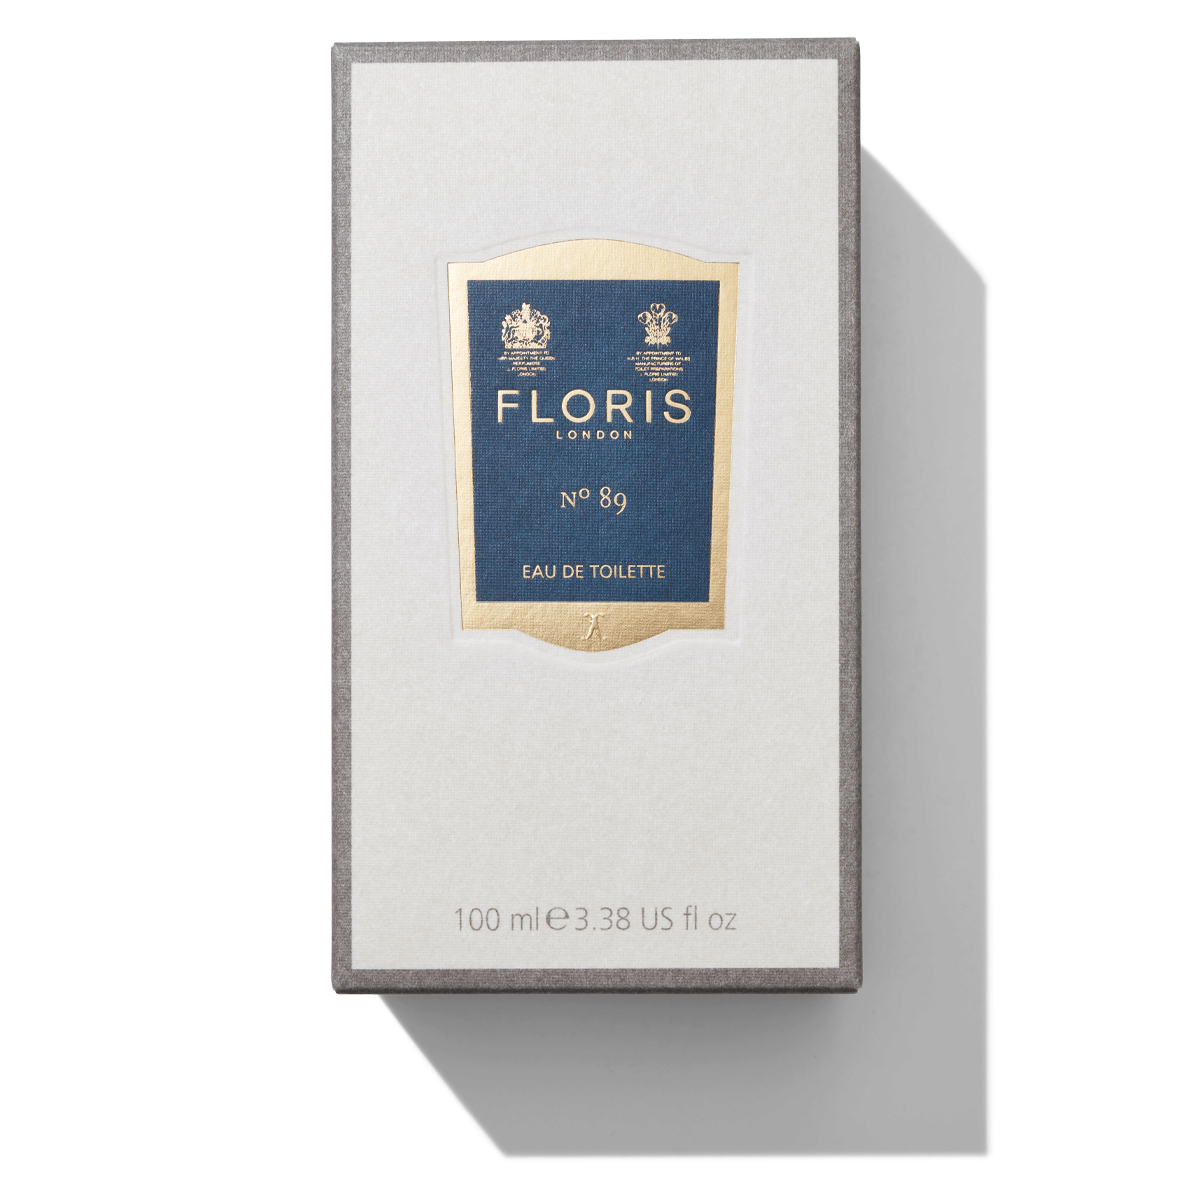 100ml White and Grey box with Navy no 89 label